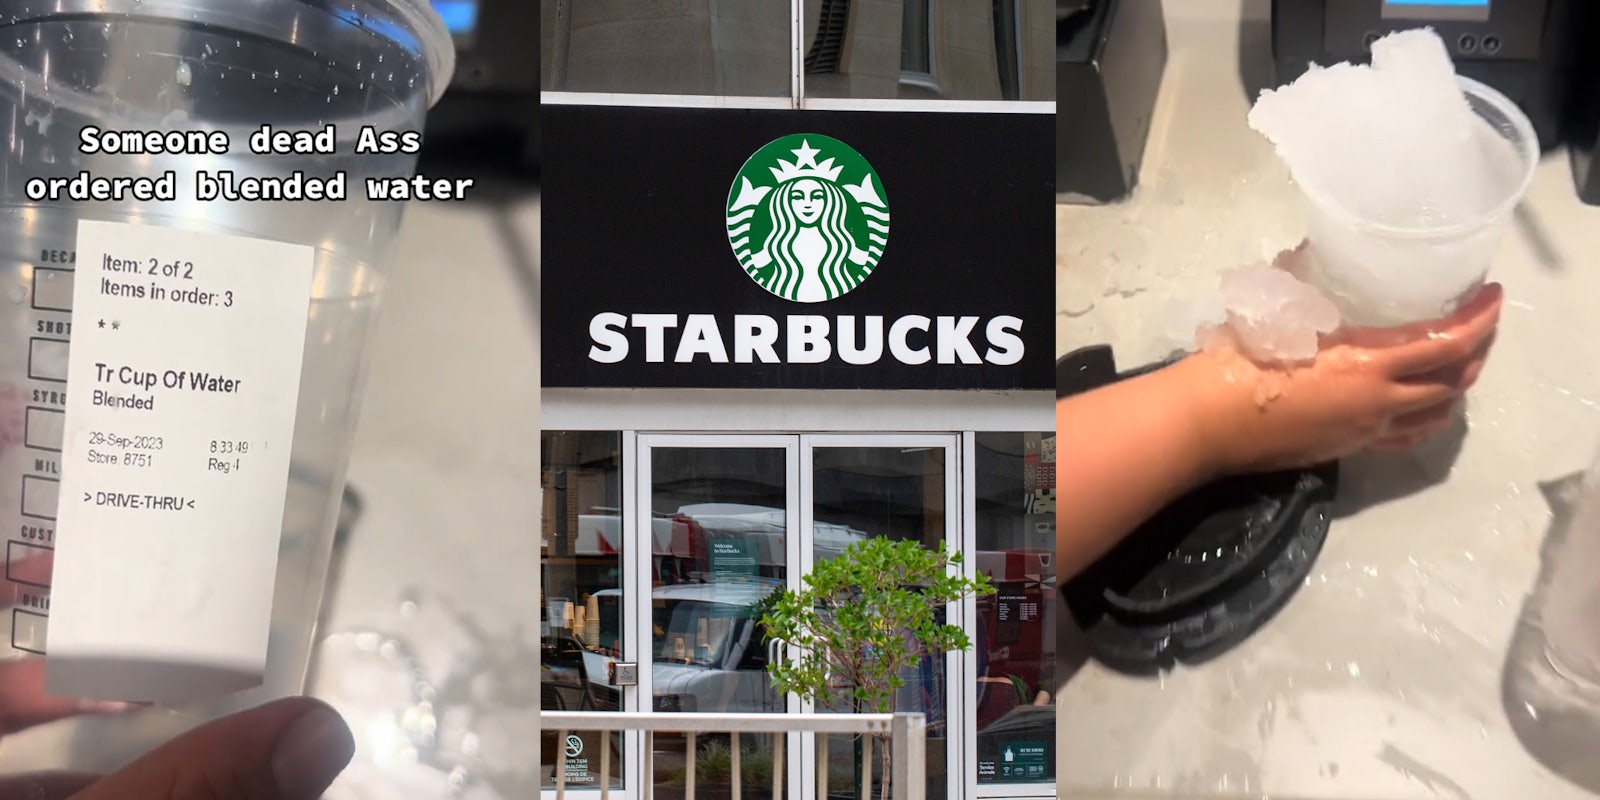 Starbucks barista shows why you shouldn’t order blended water